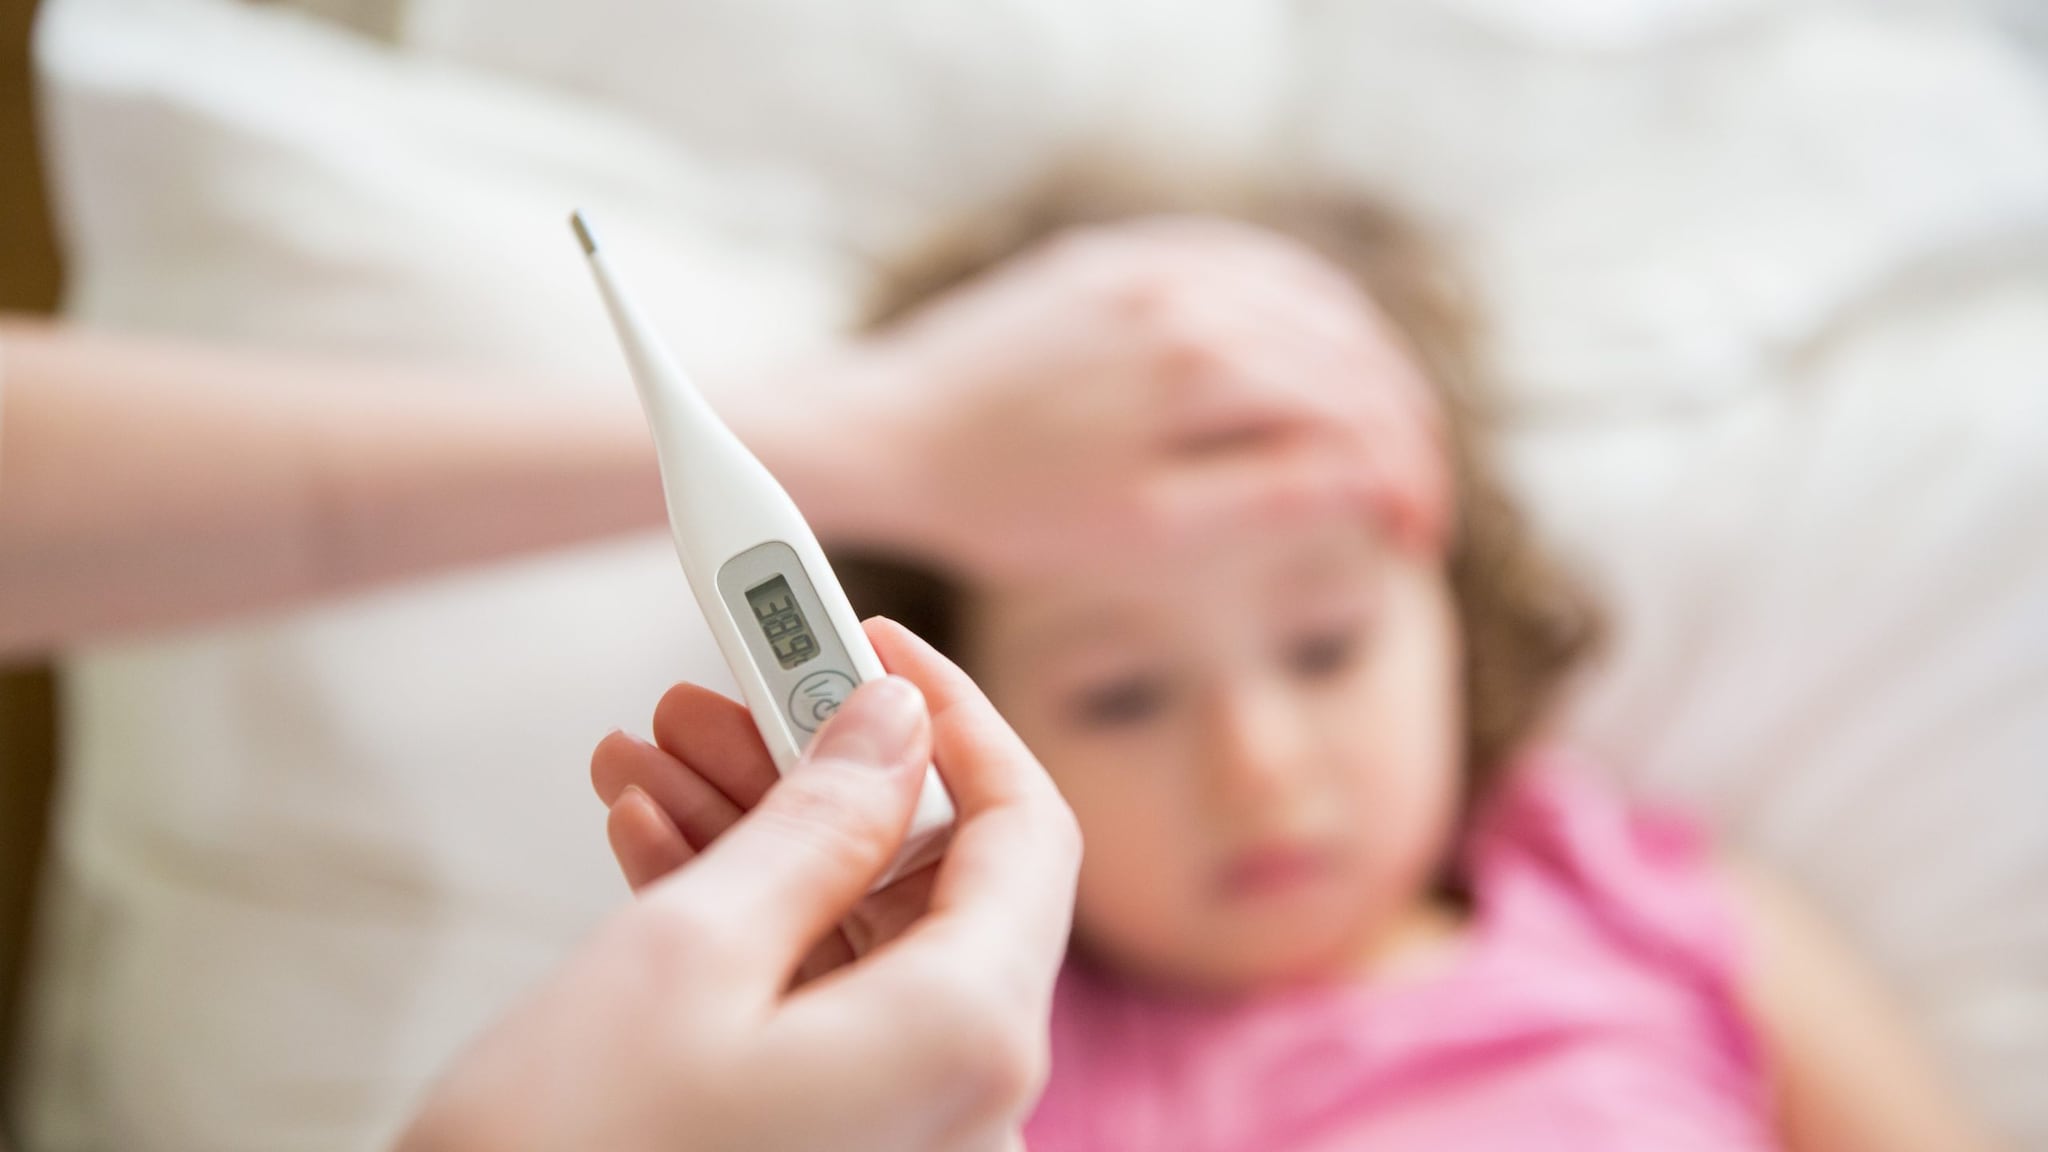 Parent checking child's tempature with a thermometer